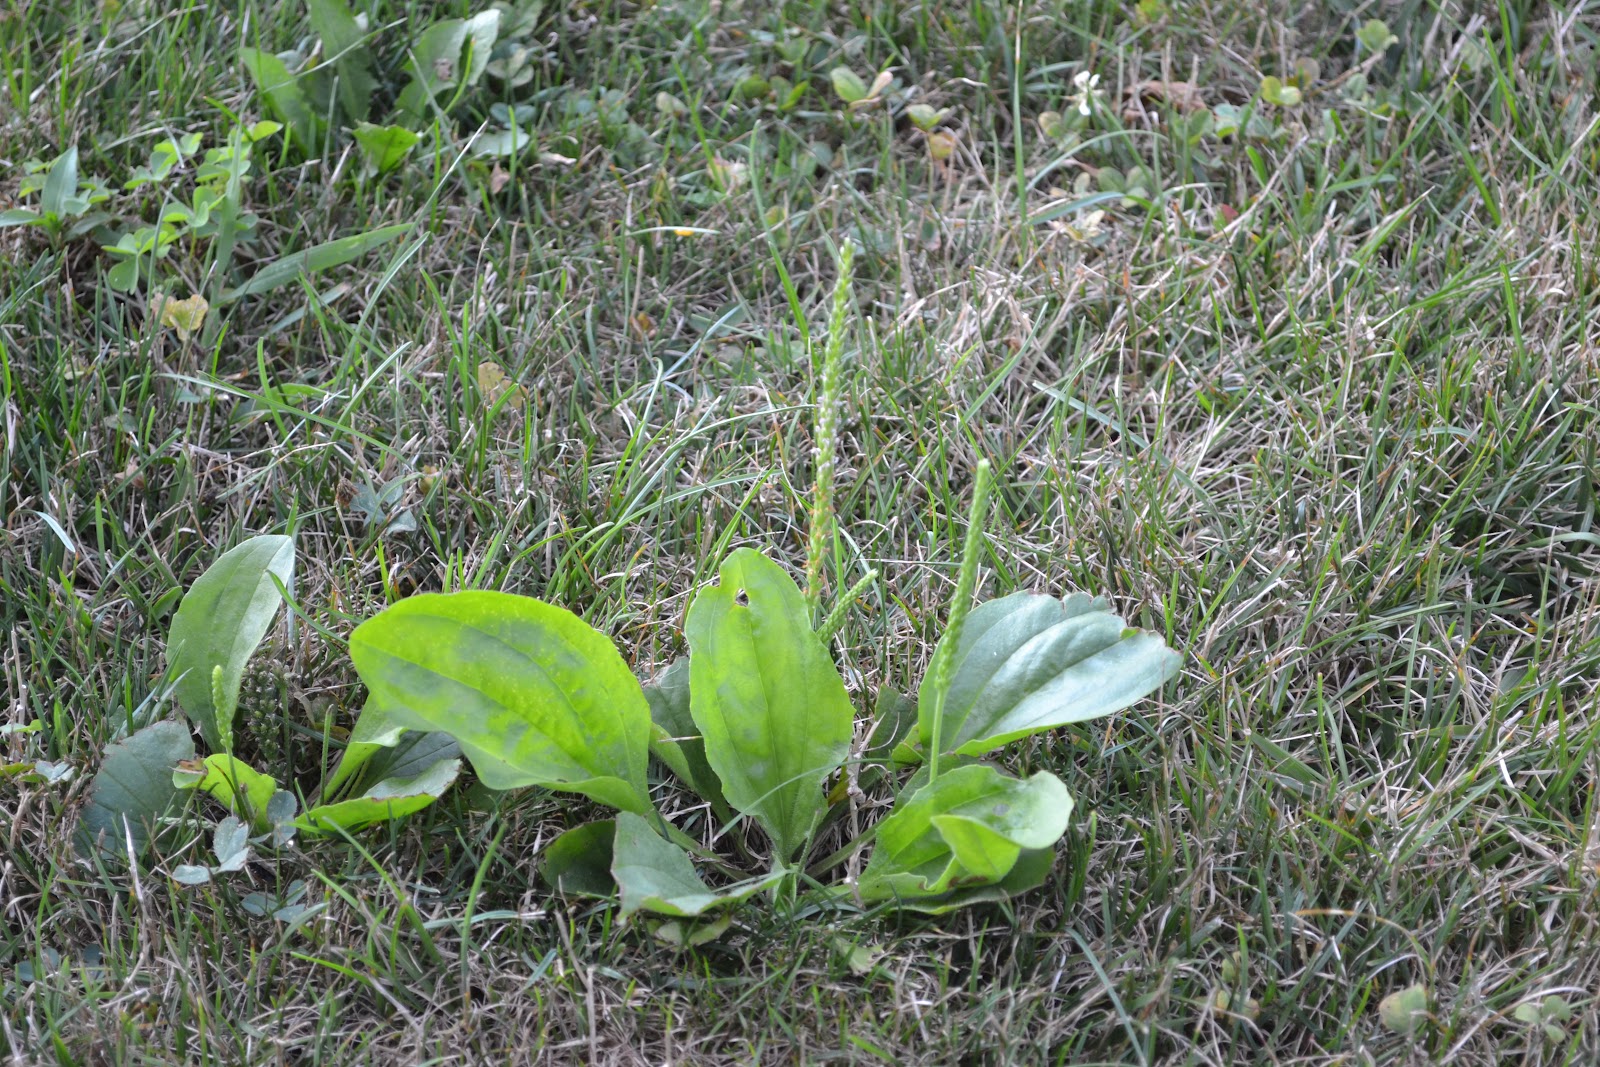 Plantain Weed Pictures